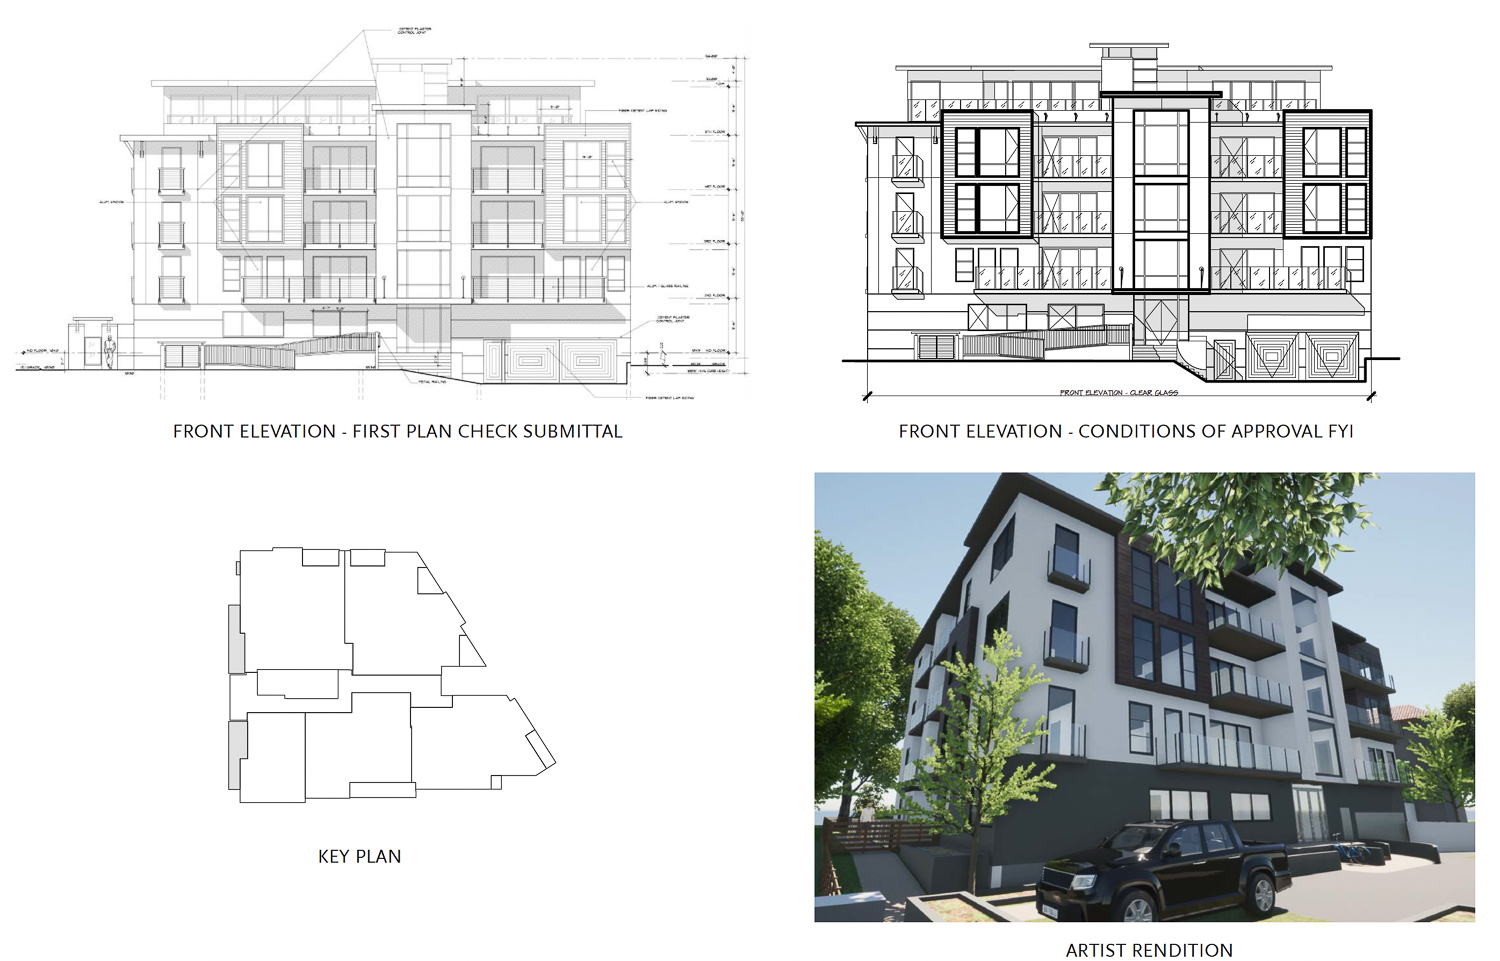 556 El Camino Real facade elevations, rendering by RSS Architecture